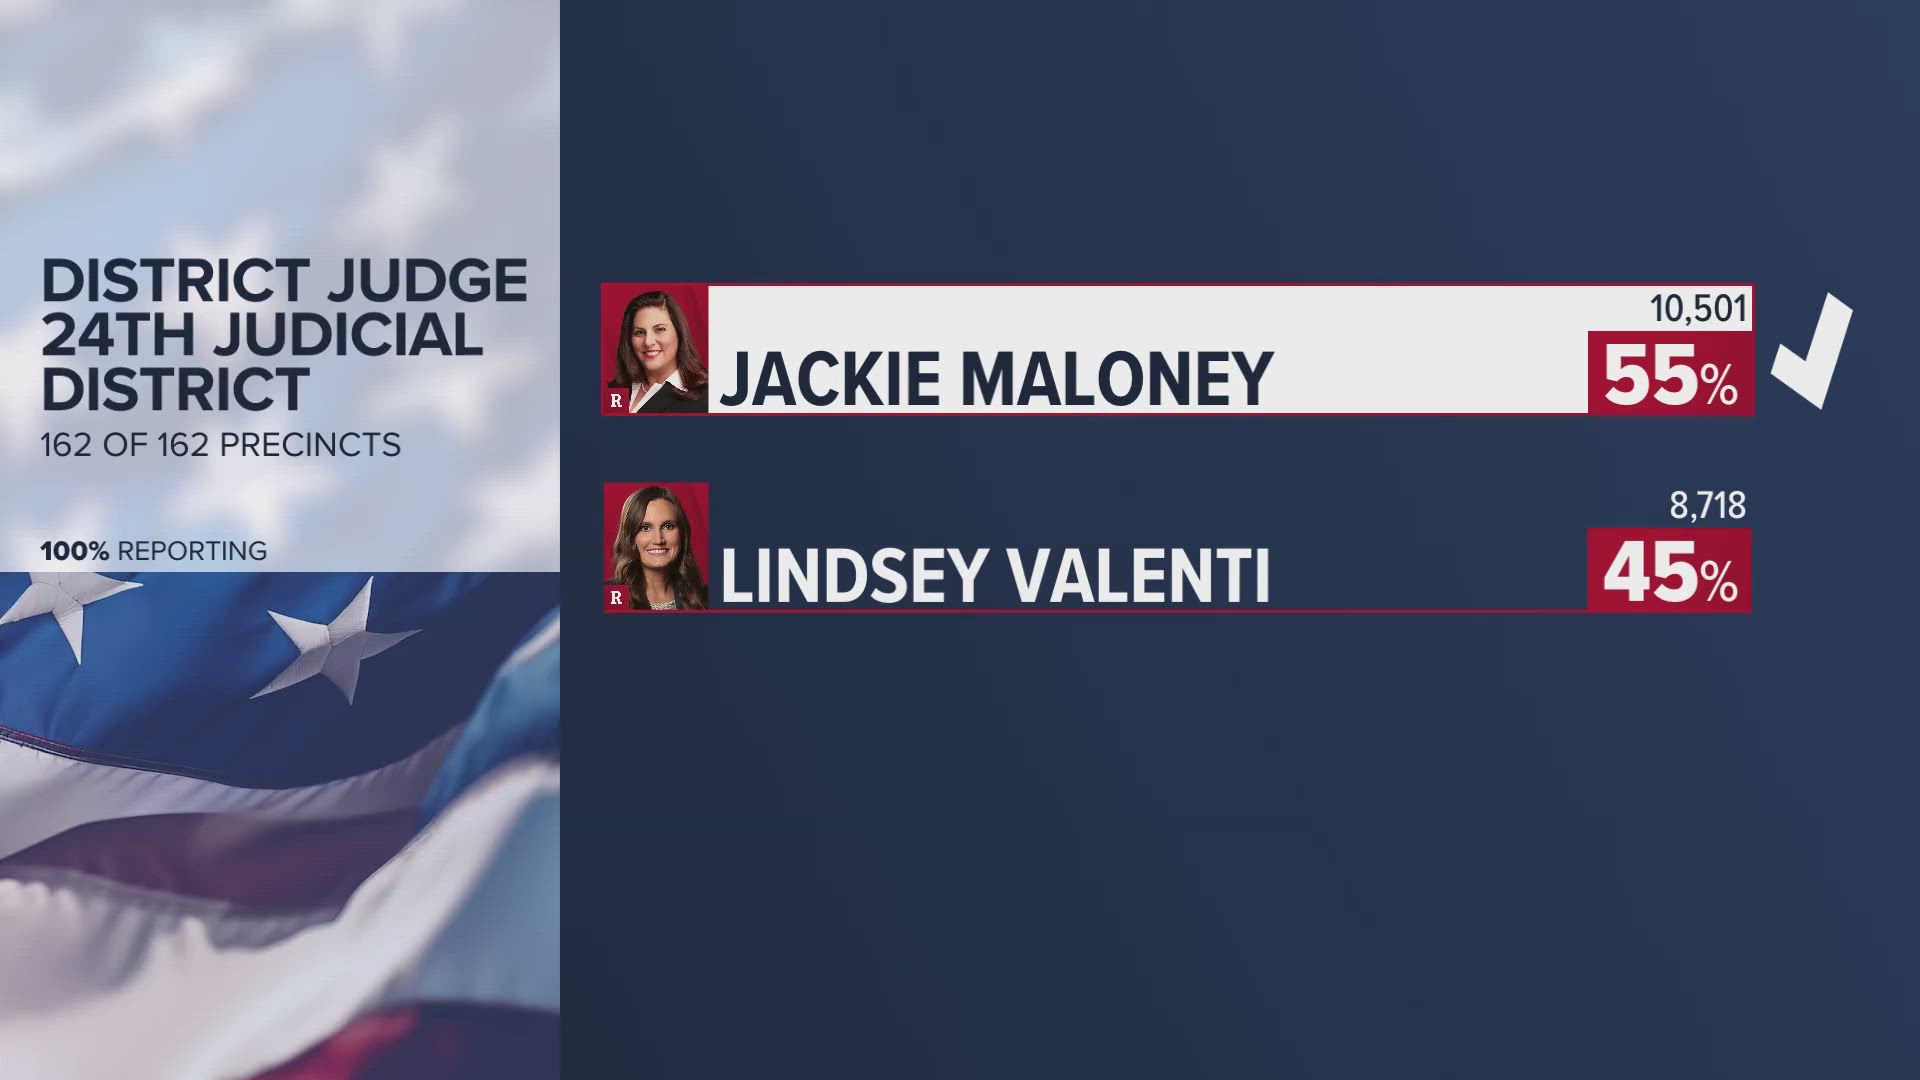 Maloney got 55 percent of the votes and won against Lindsey Valenti.